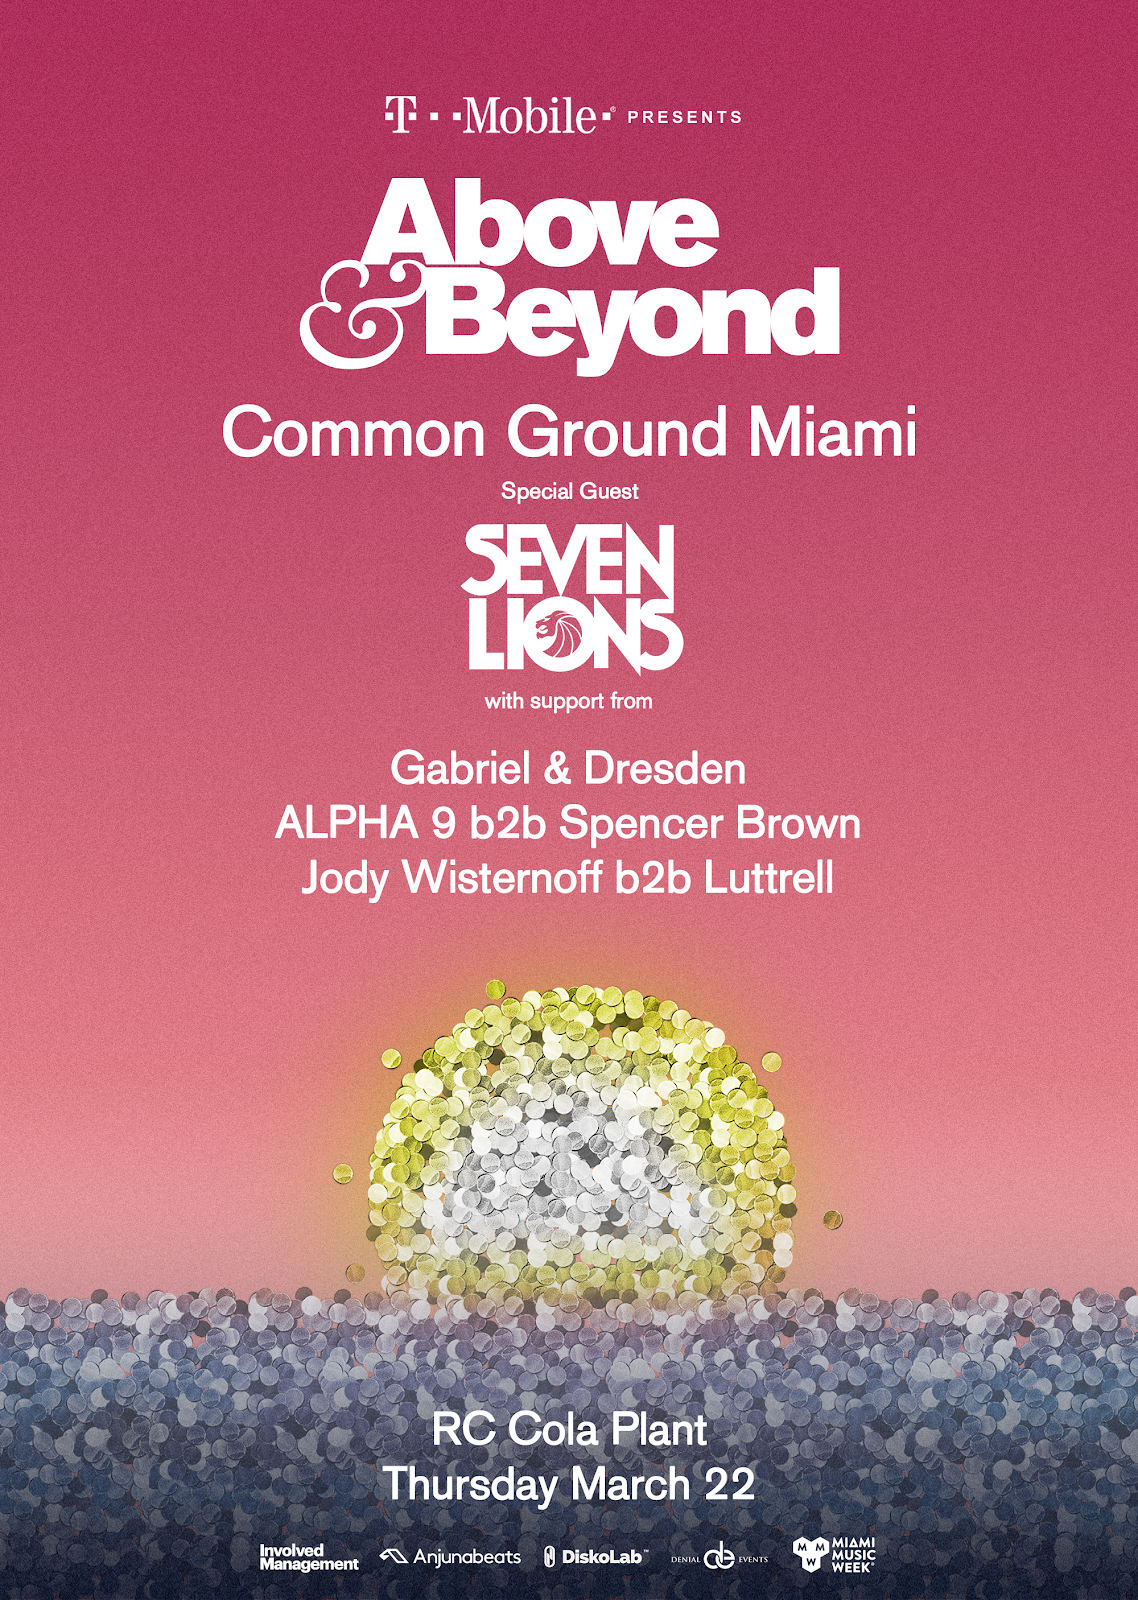 Above & Beyond is pleased to present the full lineup for their massive Miami Music Week event at the RC Cola Plant on Thursday, March 22. Celebrating the release of their acclaimed studio album Common Ground (debuted at #3 on the Billboard 200 Albums Chart), A&B will be joined at the event by Jody Wisternoff b2b Luttrell, ALPHA 9 b2b Spencer Brown, trance legends Gabriel & Dresden (celebrating the release of their own studio album The Only Road) and special guest, Seven Lions. This is Above & Beyond’s third headline event at RC Cola Plant, with previous years quickly selling out.